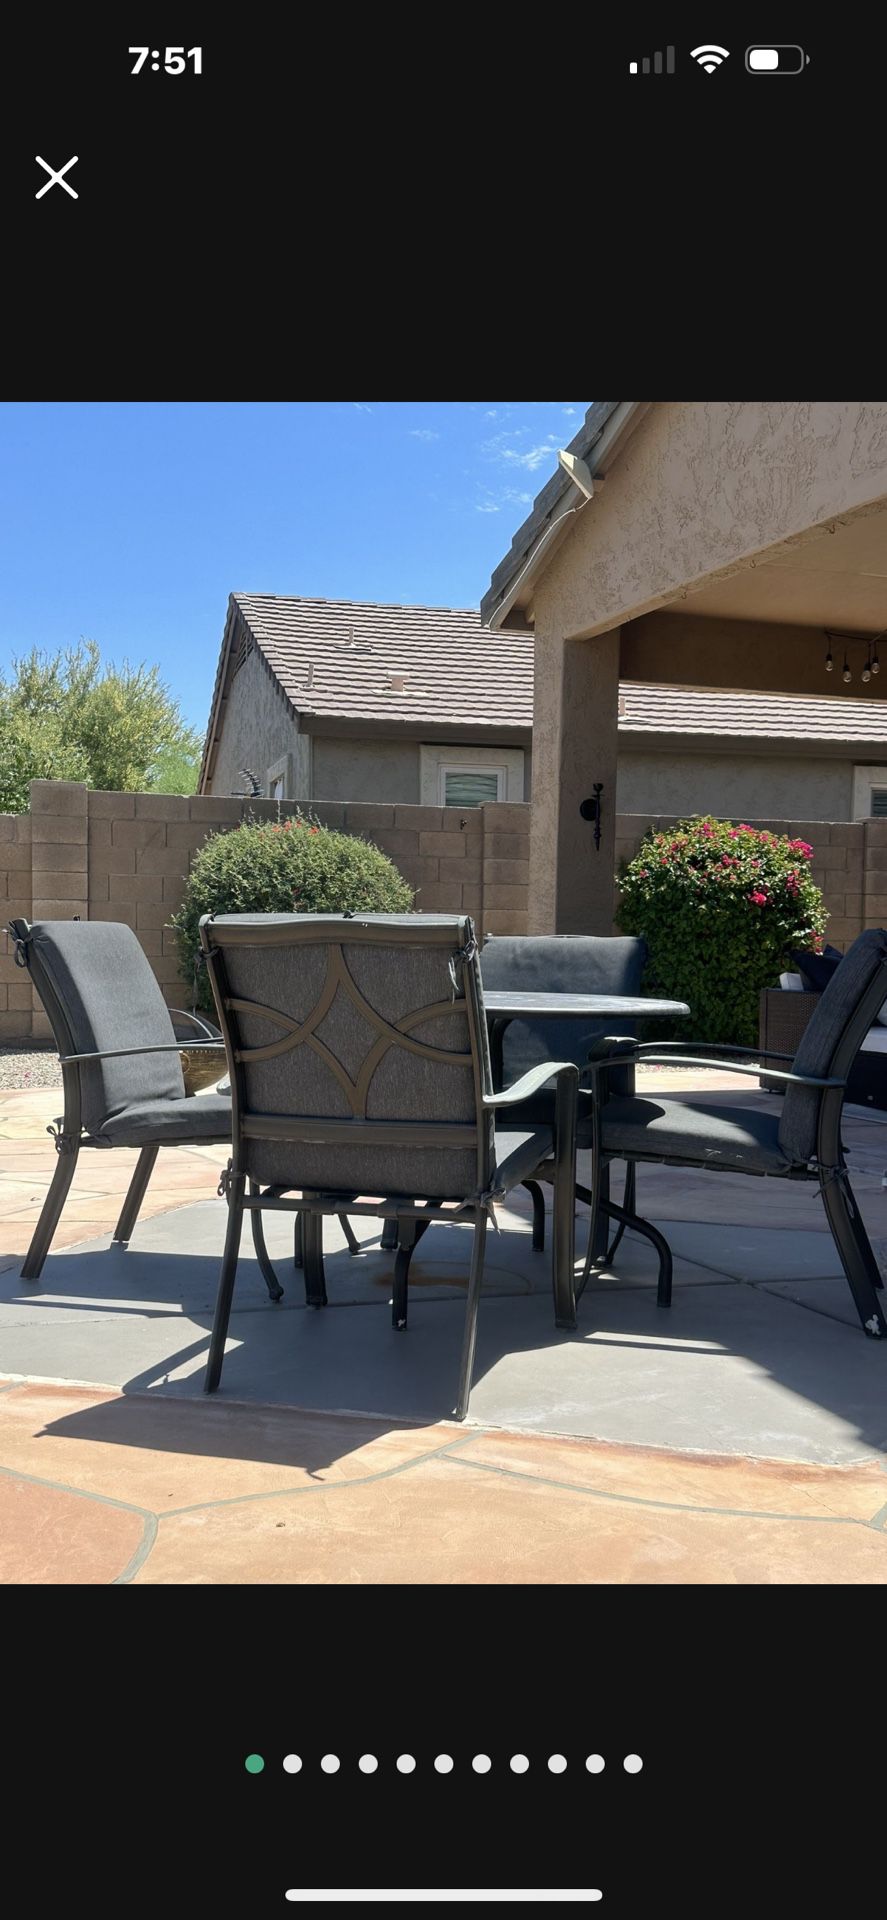 Outdoor Patio Table And 4 Chairs With Cushions